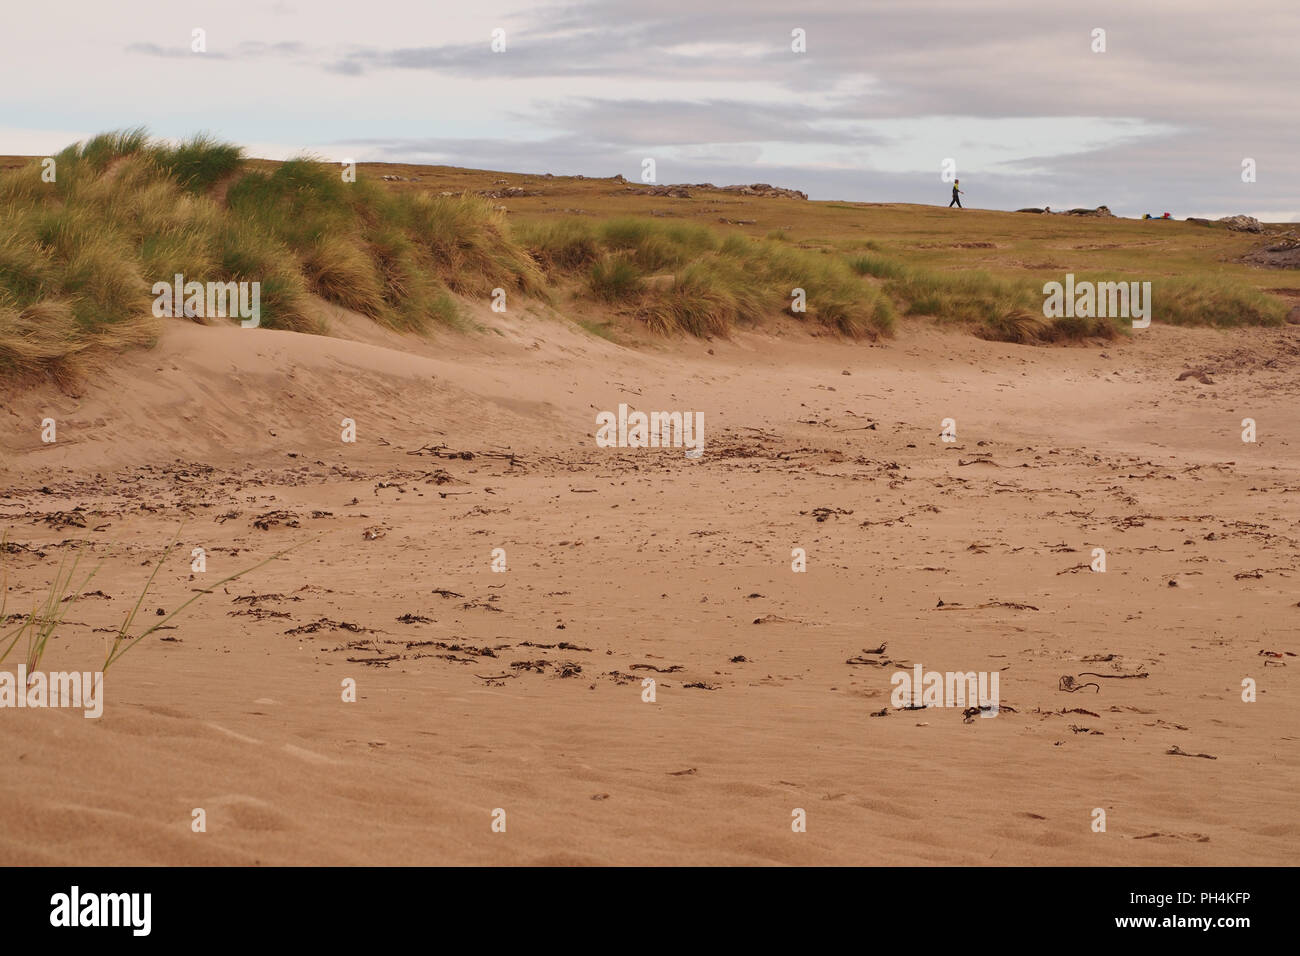 A view on Achnahaird beach, Scotland, looking along the edge of the beach with large clumps of Marram Grass running all the way along and a walker Stock Photo